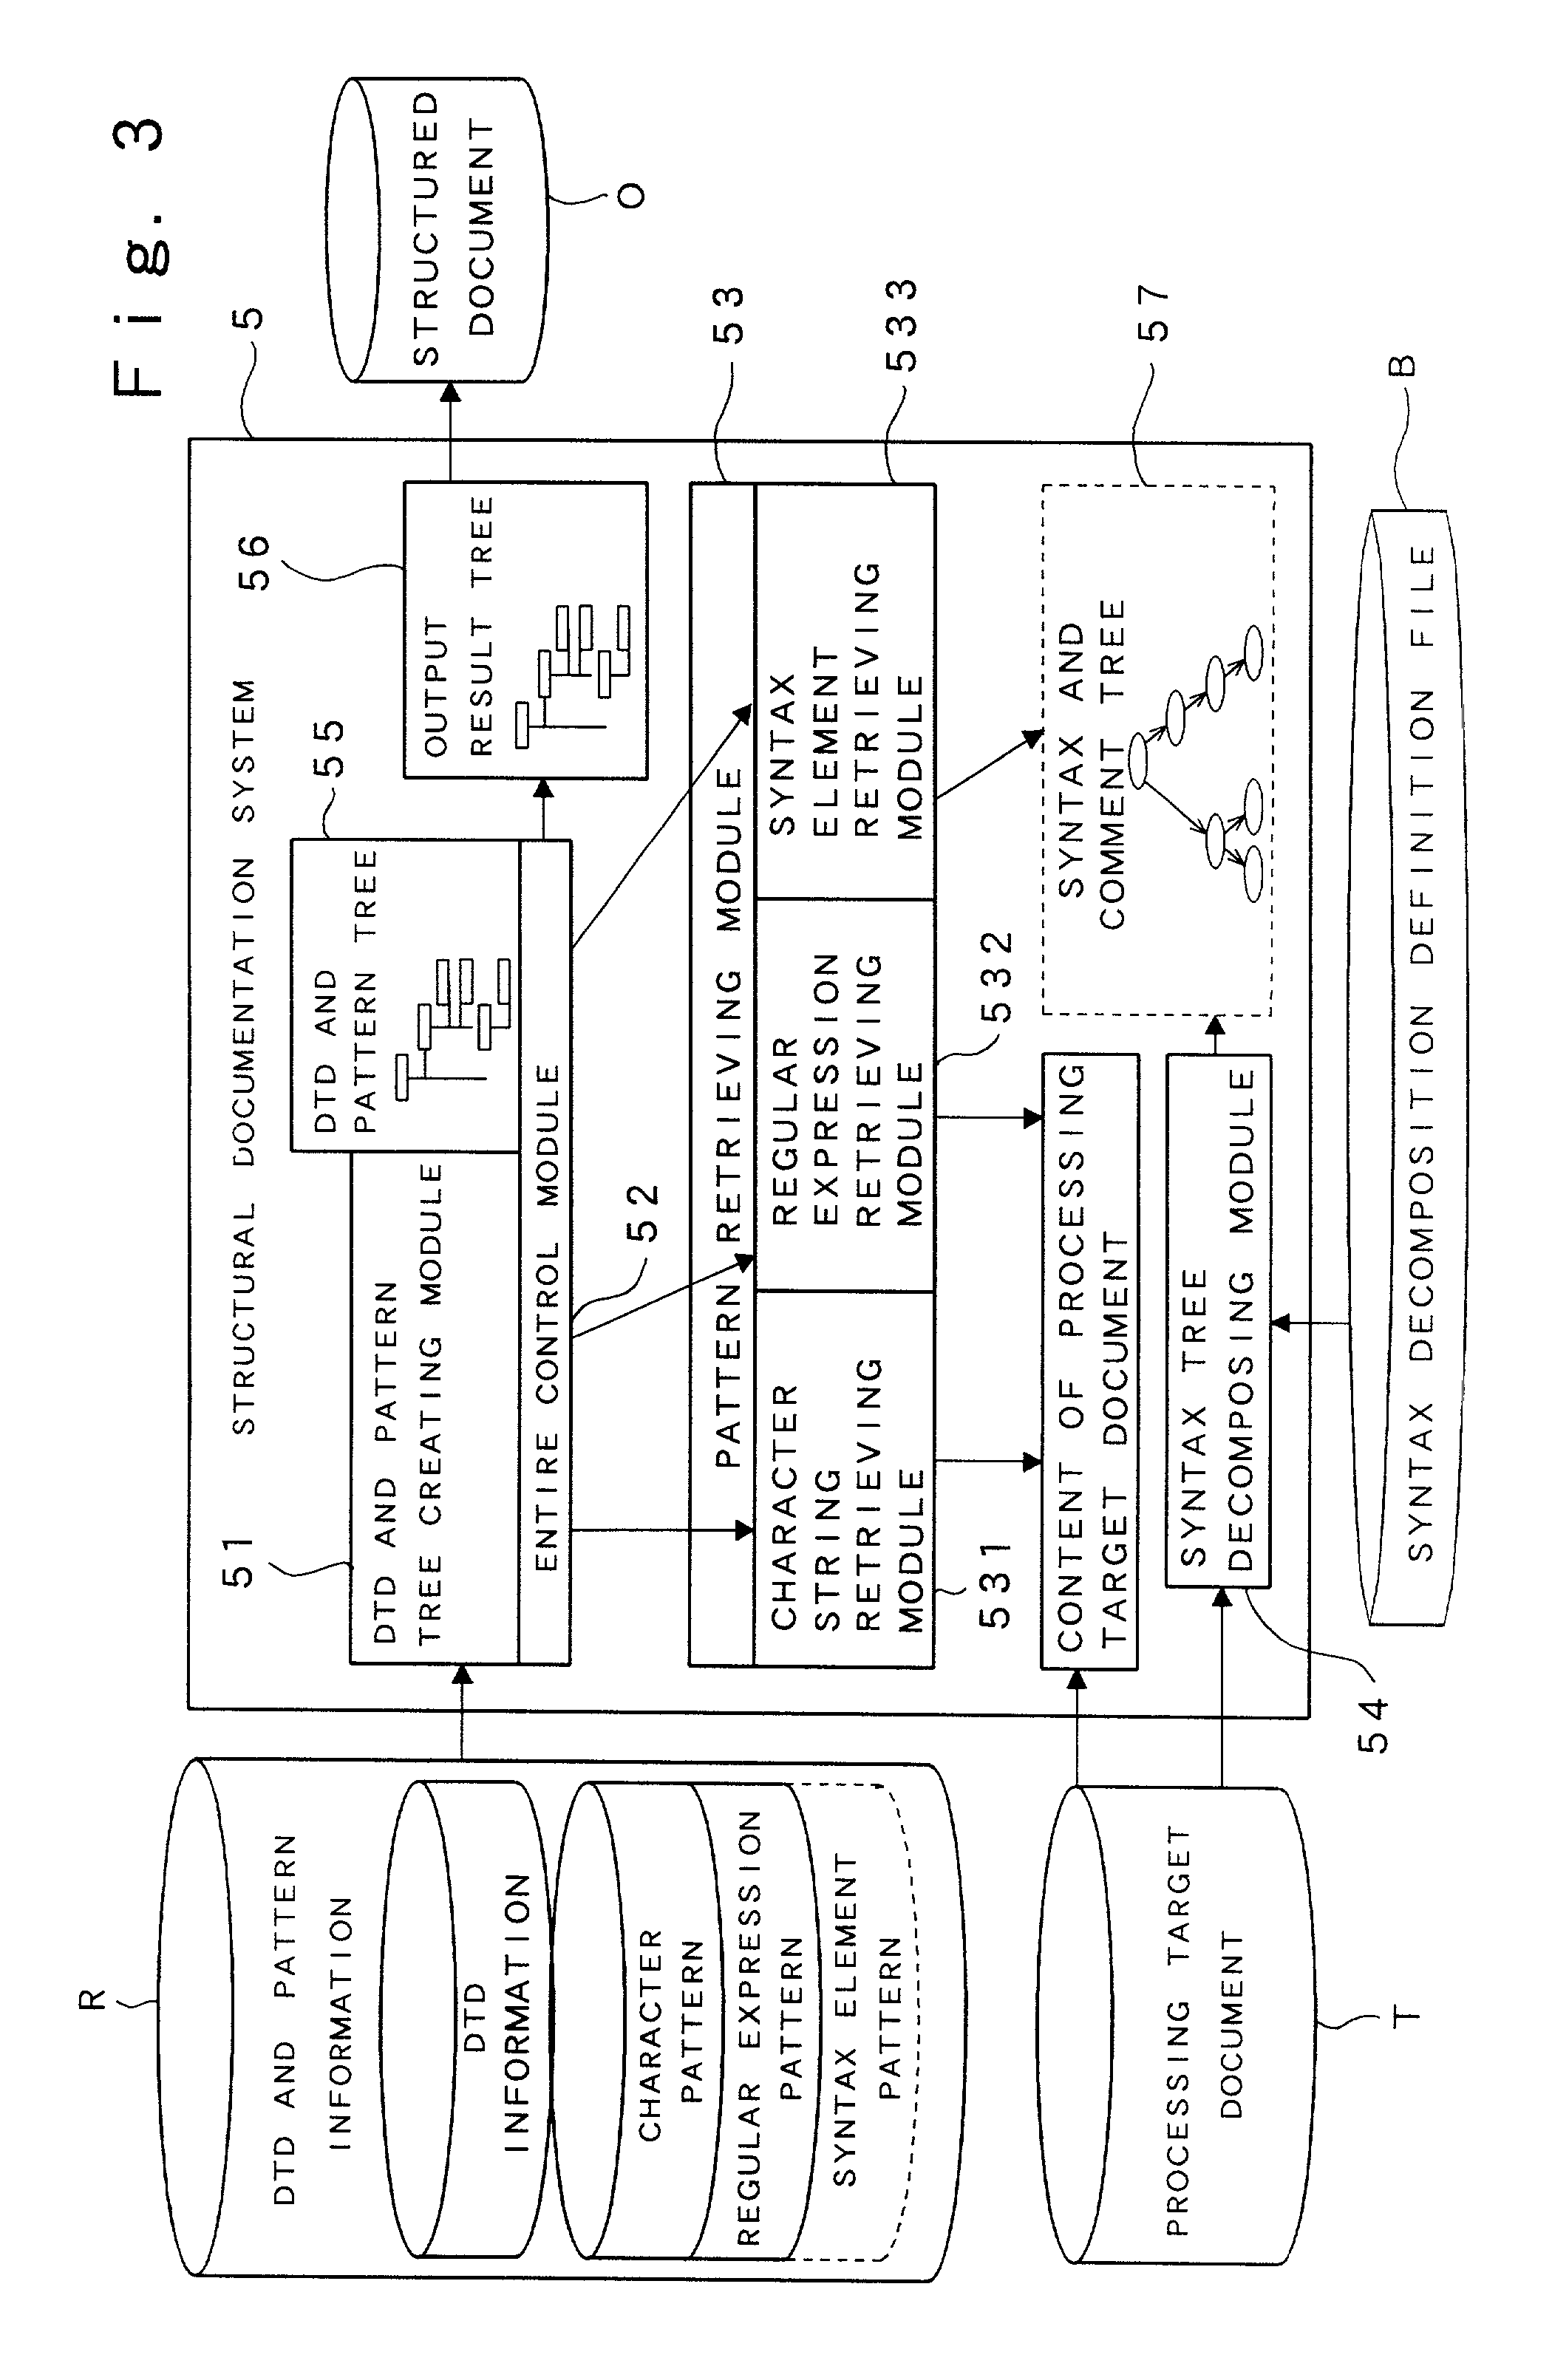 Structural documentation system